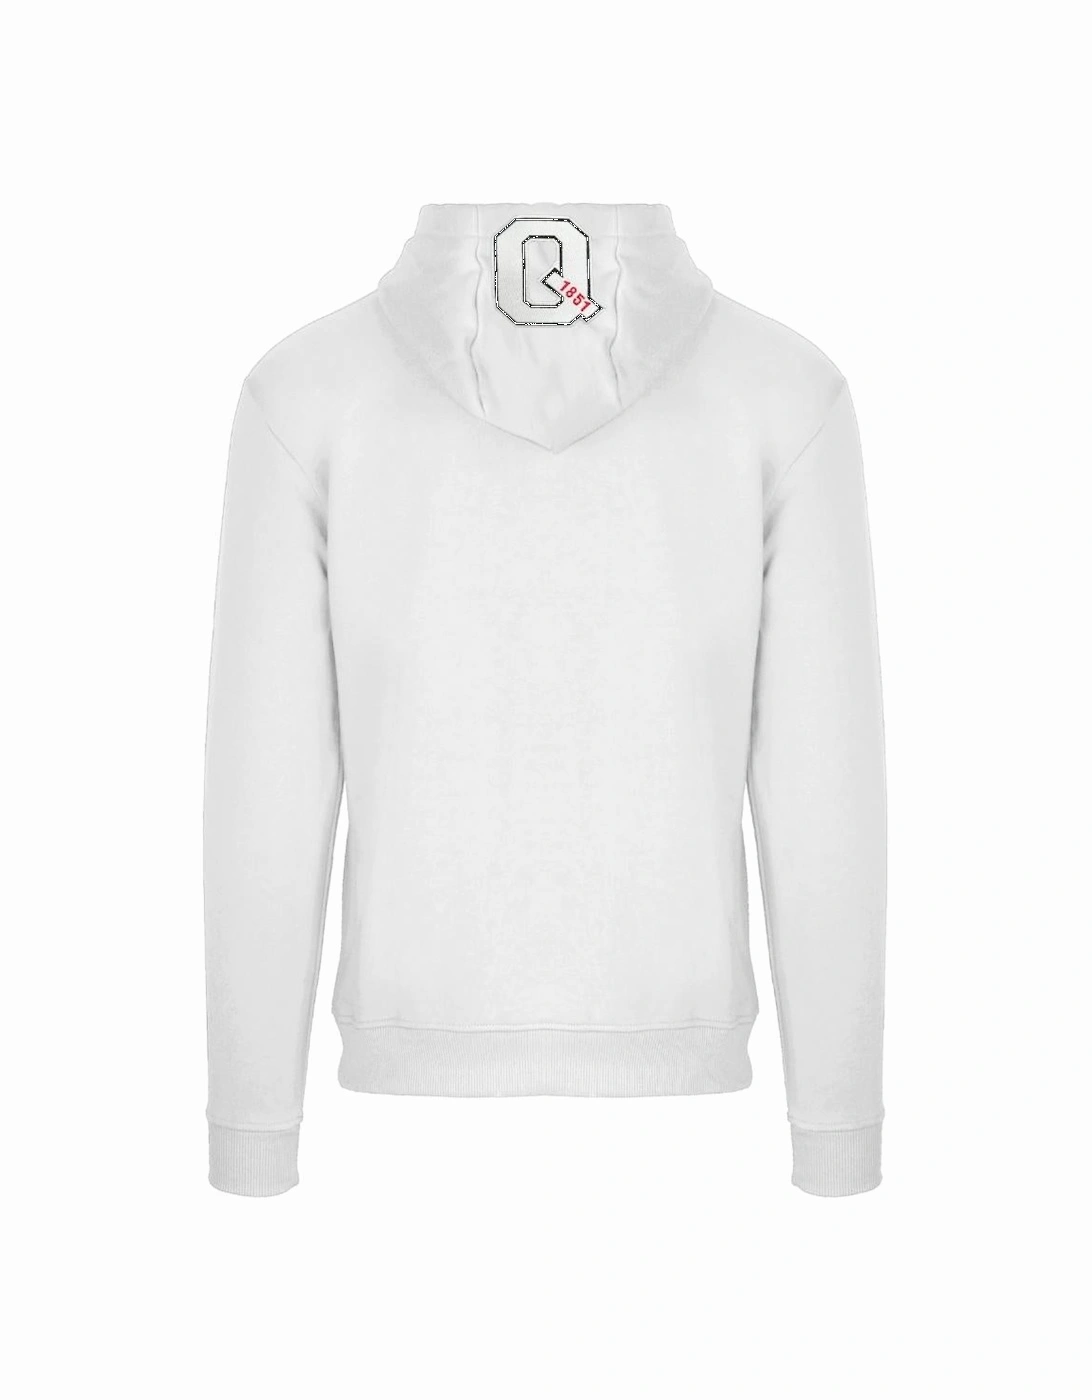 Classic Large A Logo White Zip-Up Hoodie